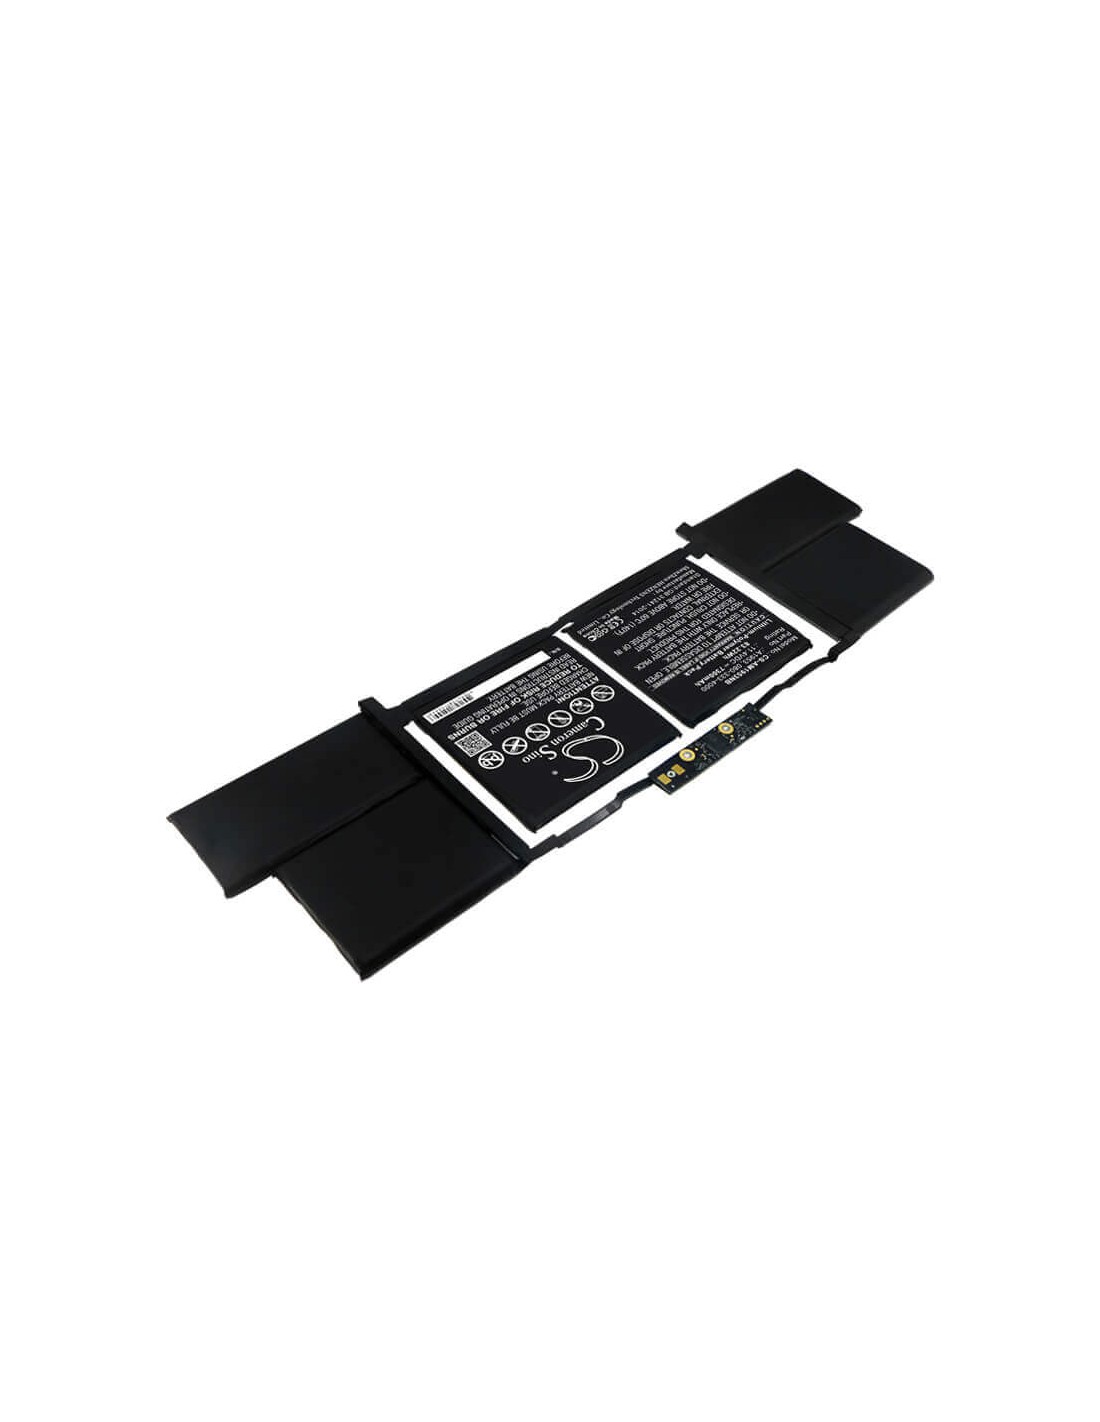 Battery for Apple, Macbook Pro 15 Inch Mv912ll/a*, Macbook Pro 15 Inch Touch Bar A1990 2019, Macbook Pro 15 Inch Touch Bar A1990